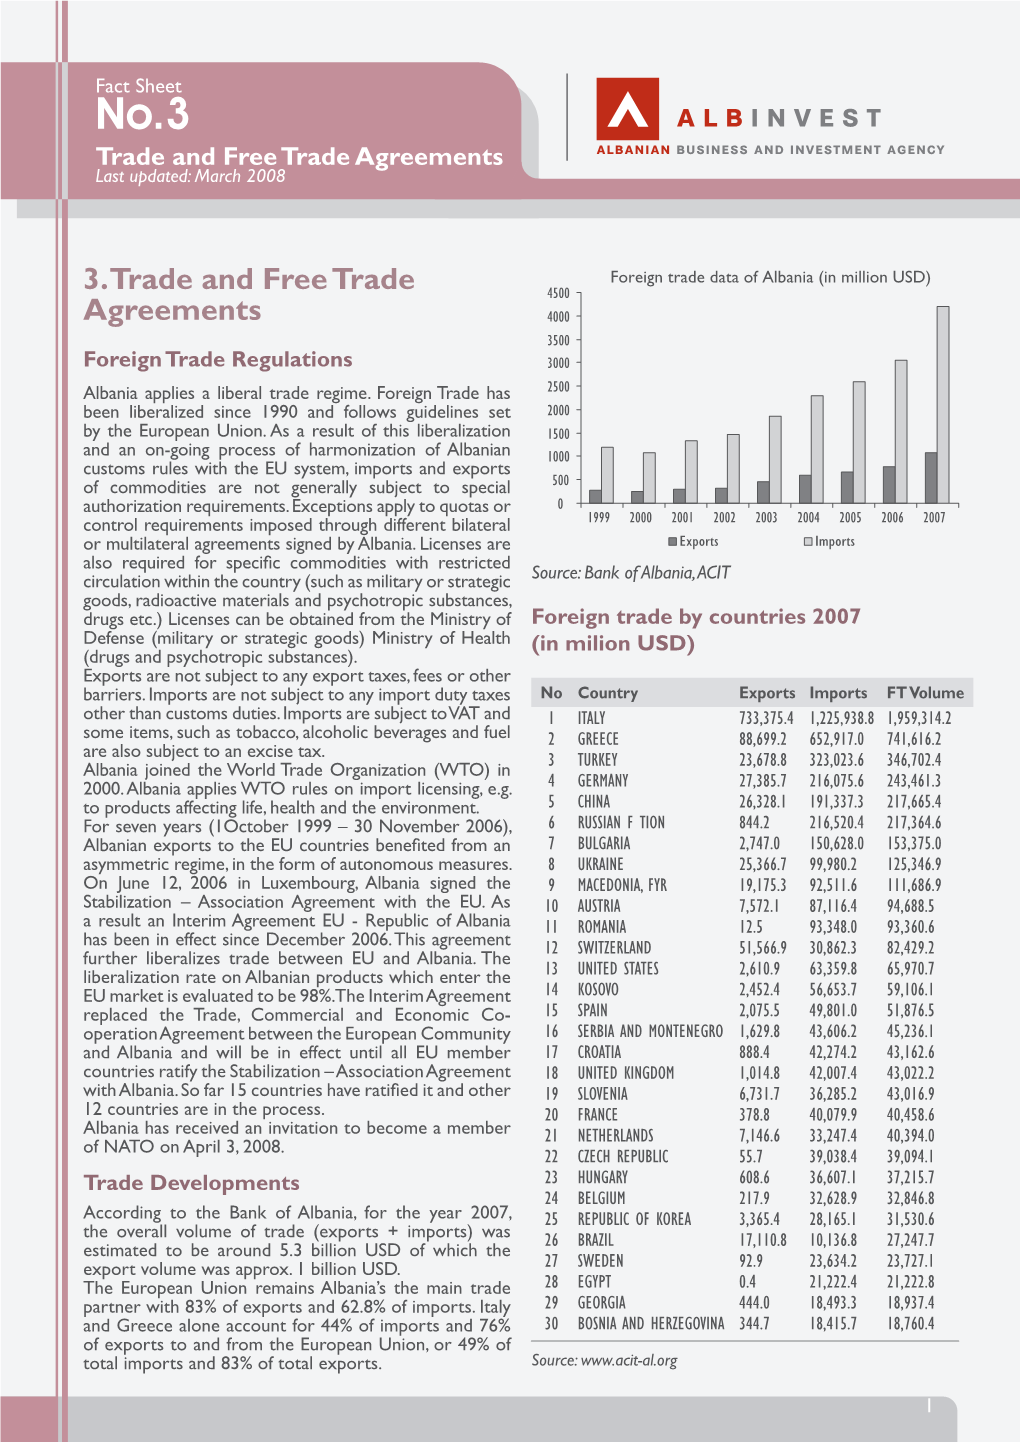 3. Trade and Free Trade Agreements